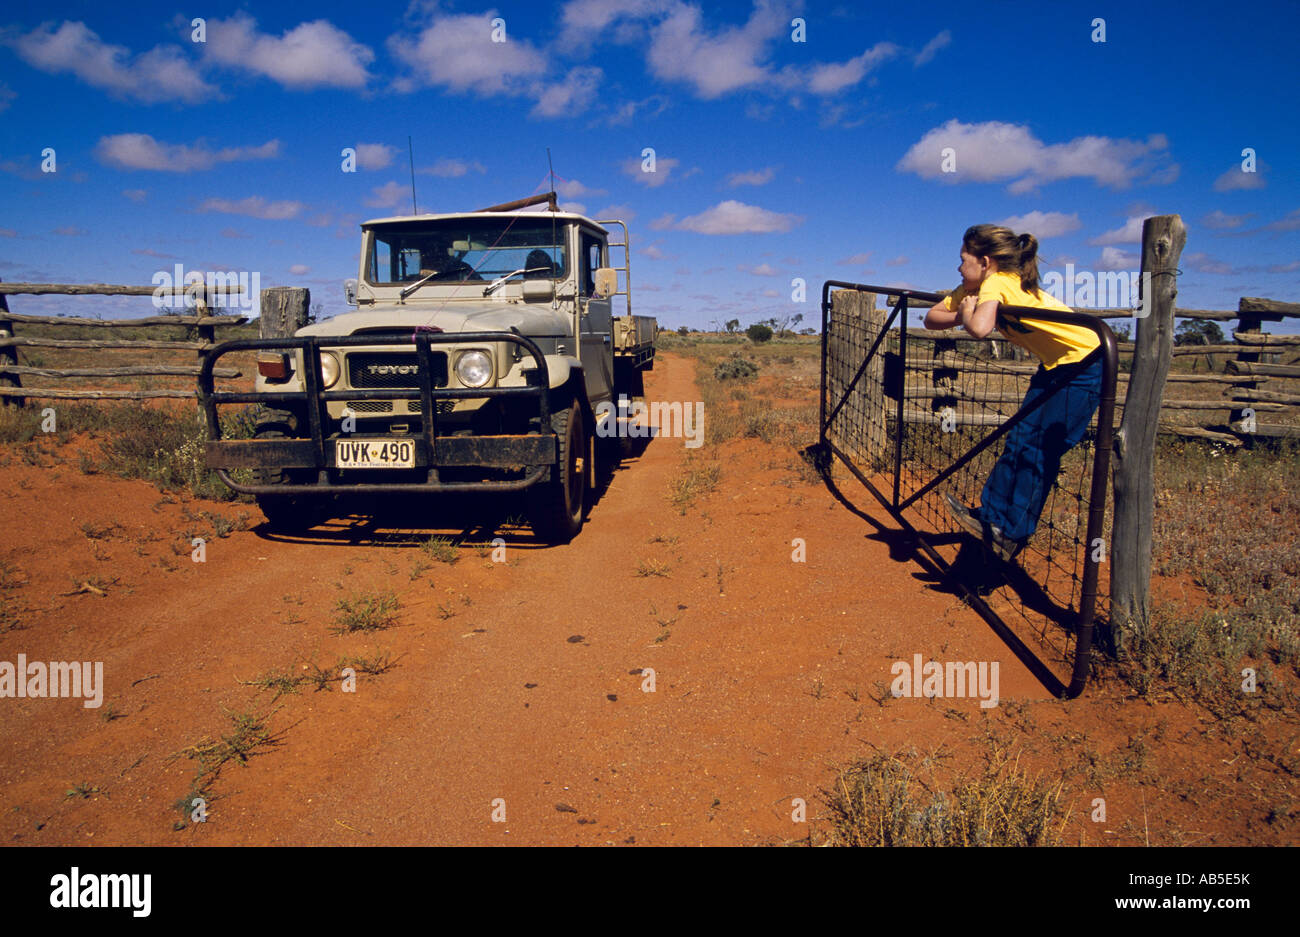 Young opening farm gate, Stock Photo -